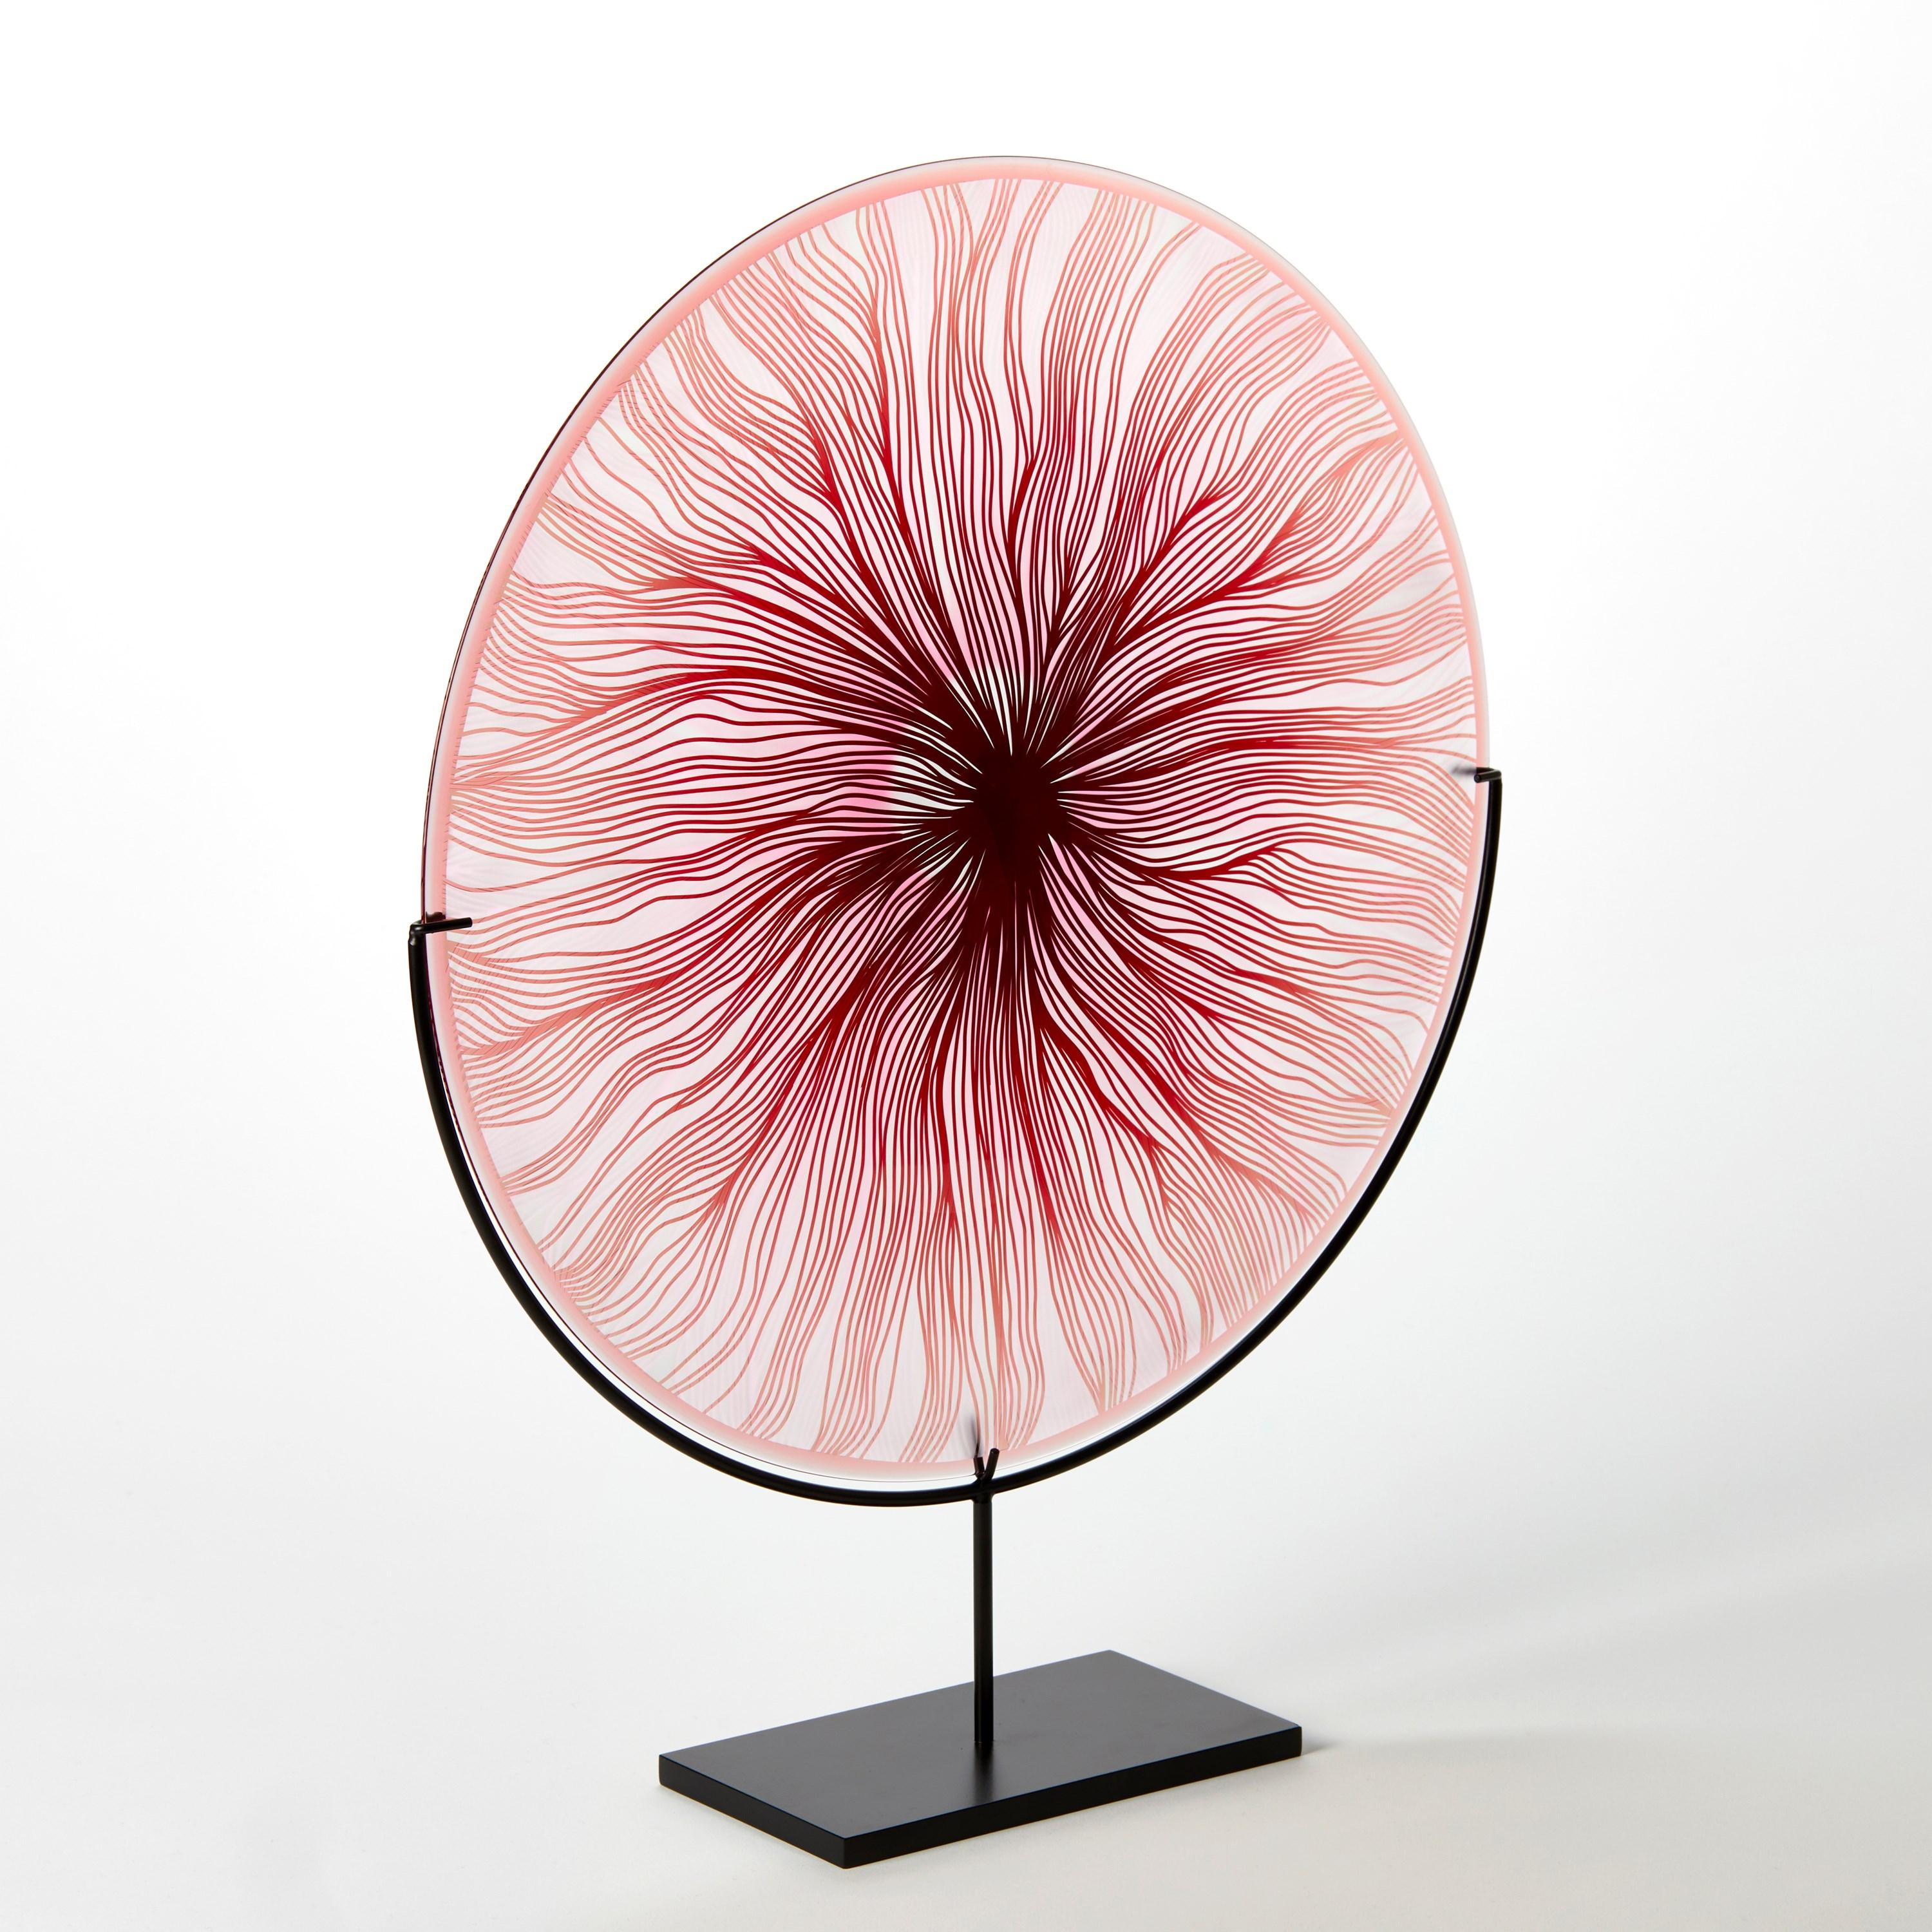 Organic Modern Solar Storm Ruby Red over Pale Pink, a linear cut glass artwork by Kate Jones For Sale